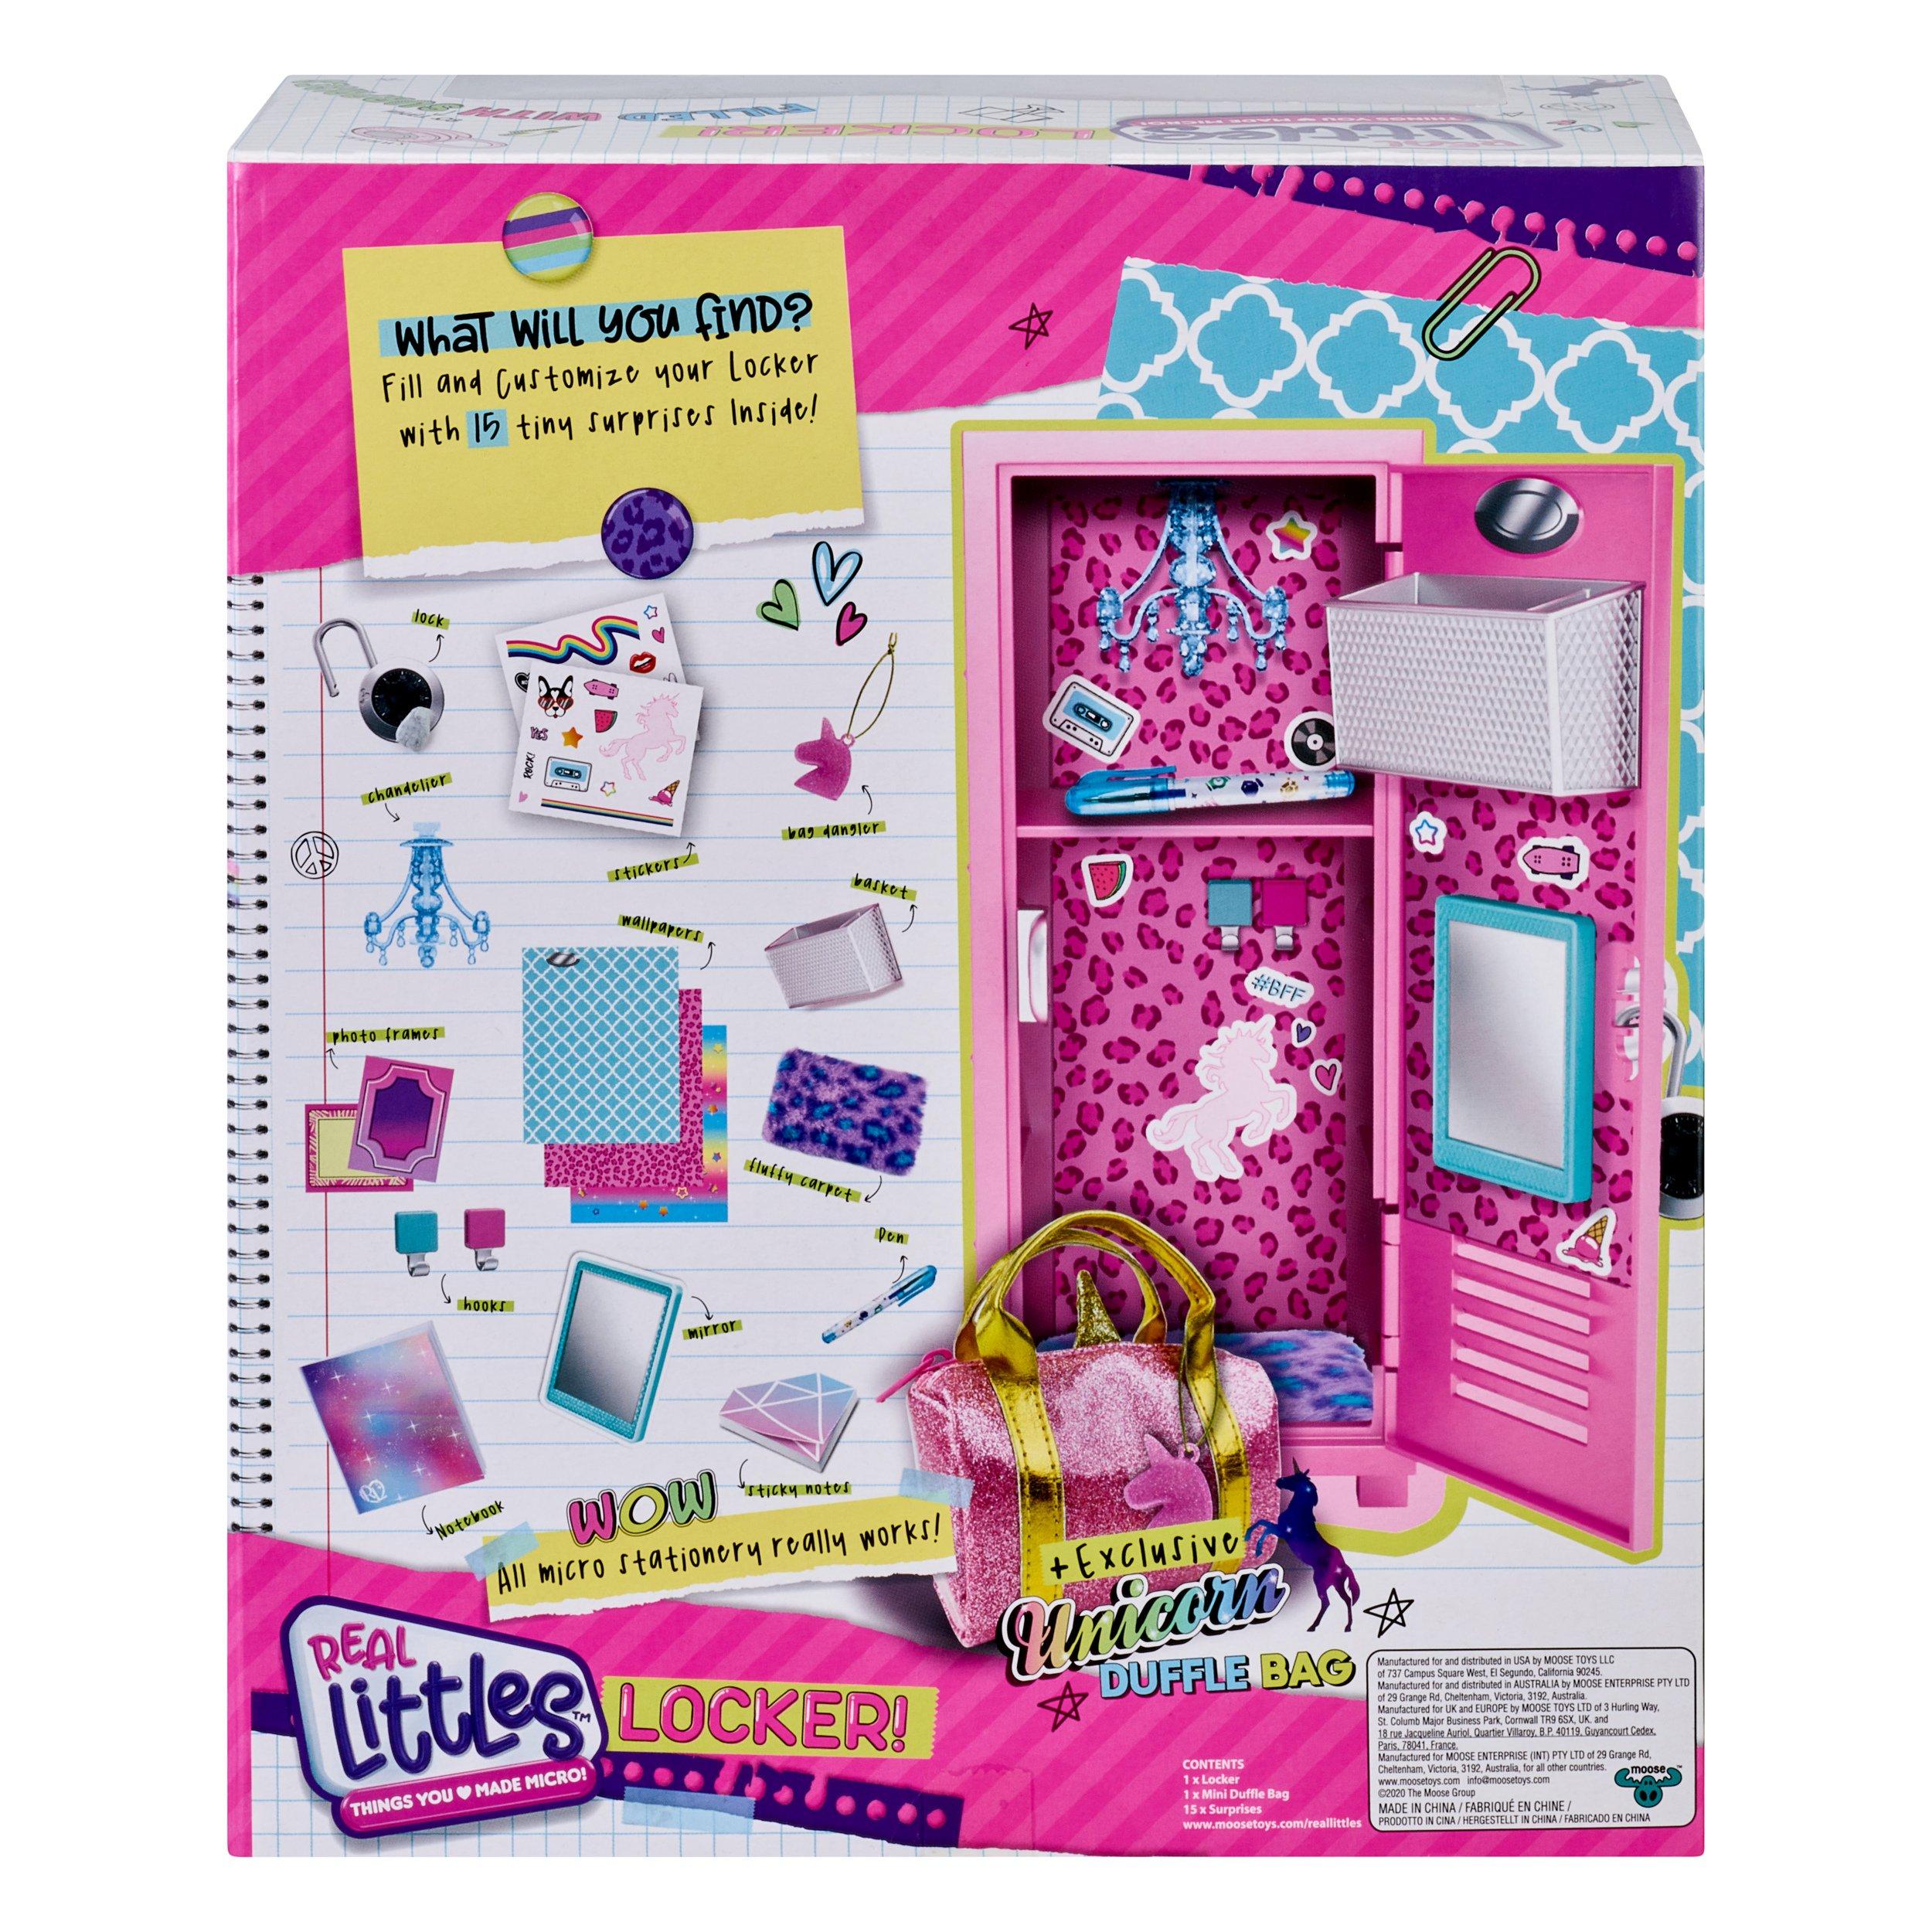 Real Littles Locker Unboxing Toy Review